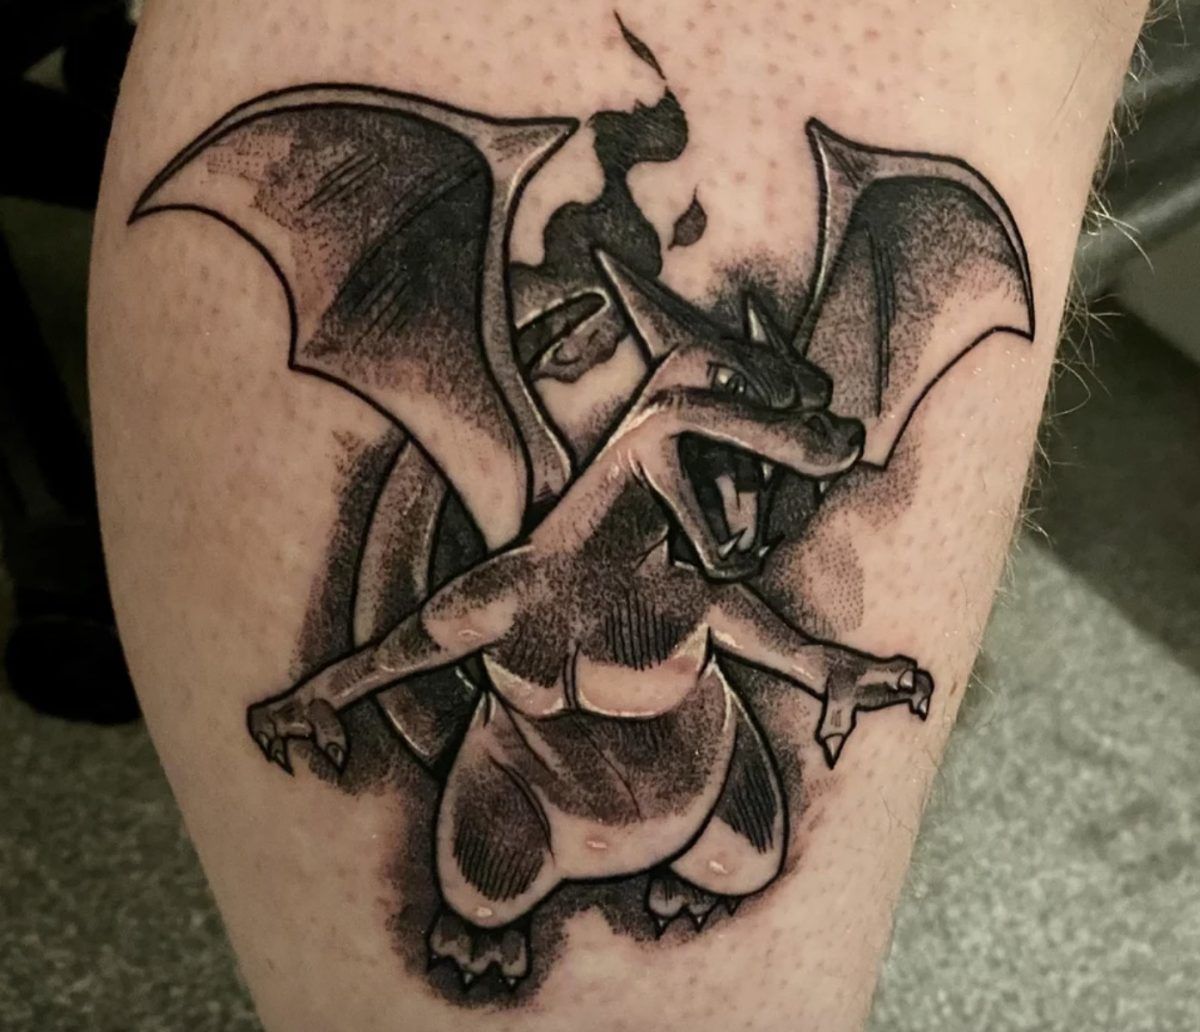 Charizard tattoo! #charizard #charizardtattoo #eternalink #workhorseirons # tattoo #tattoos | By Larry Trull Jr.Facebook